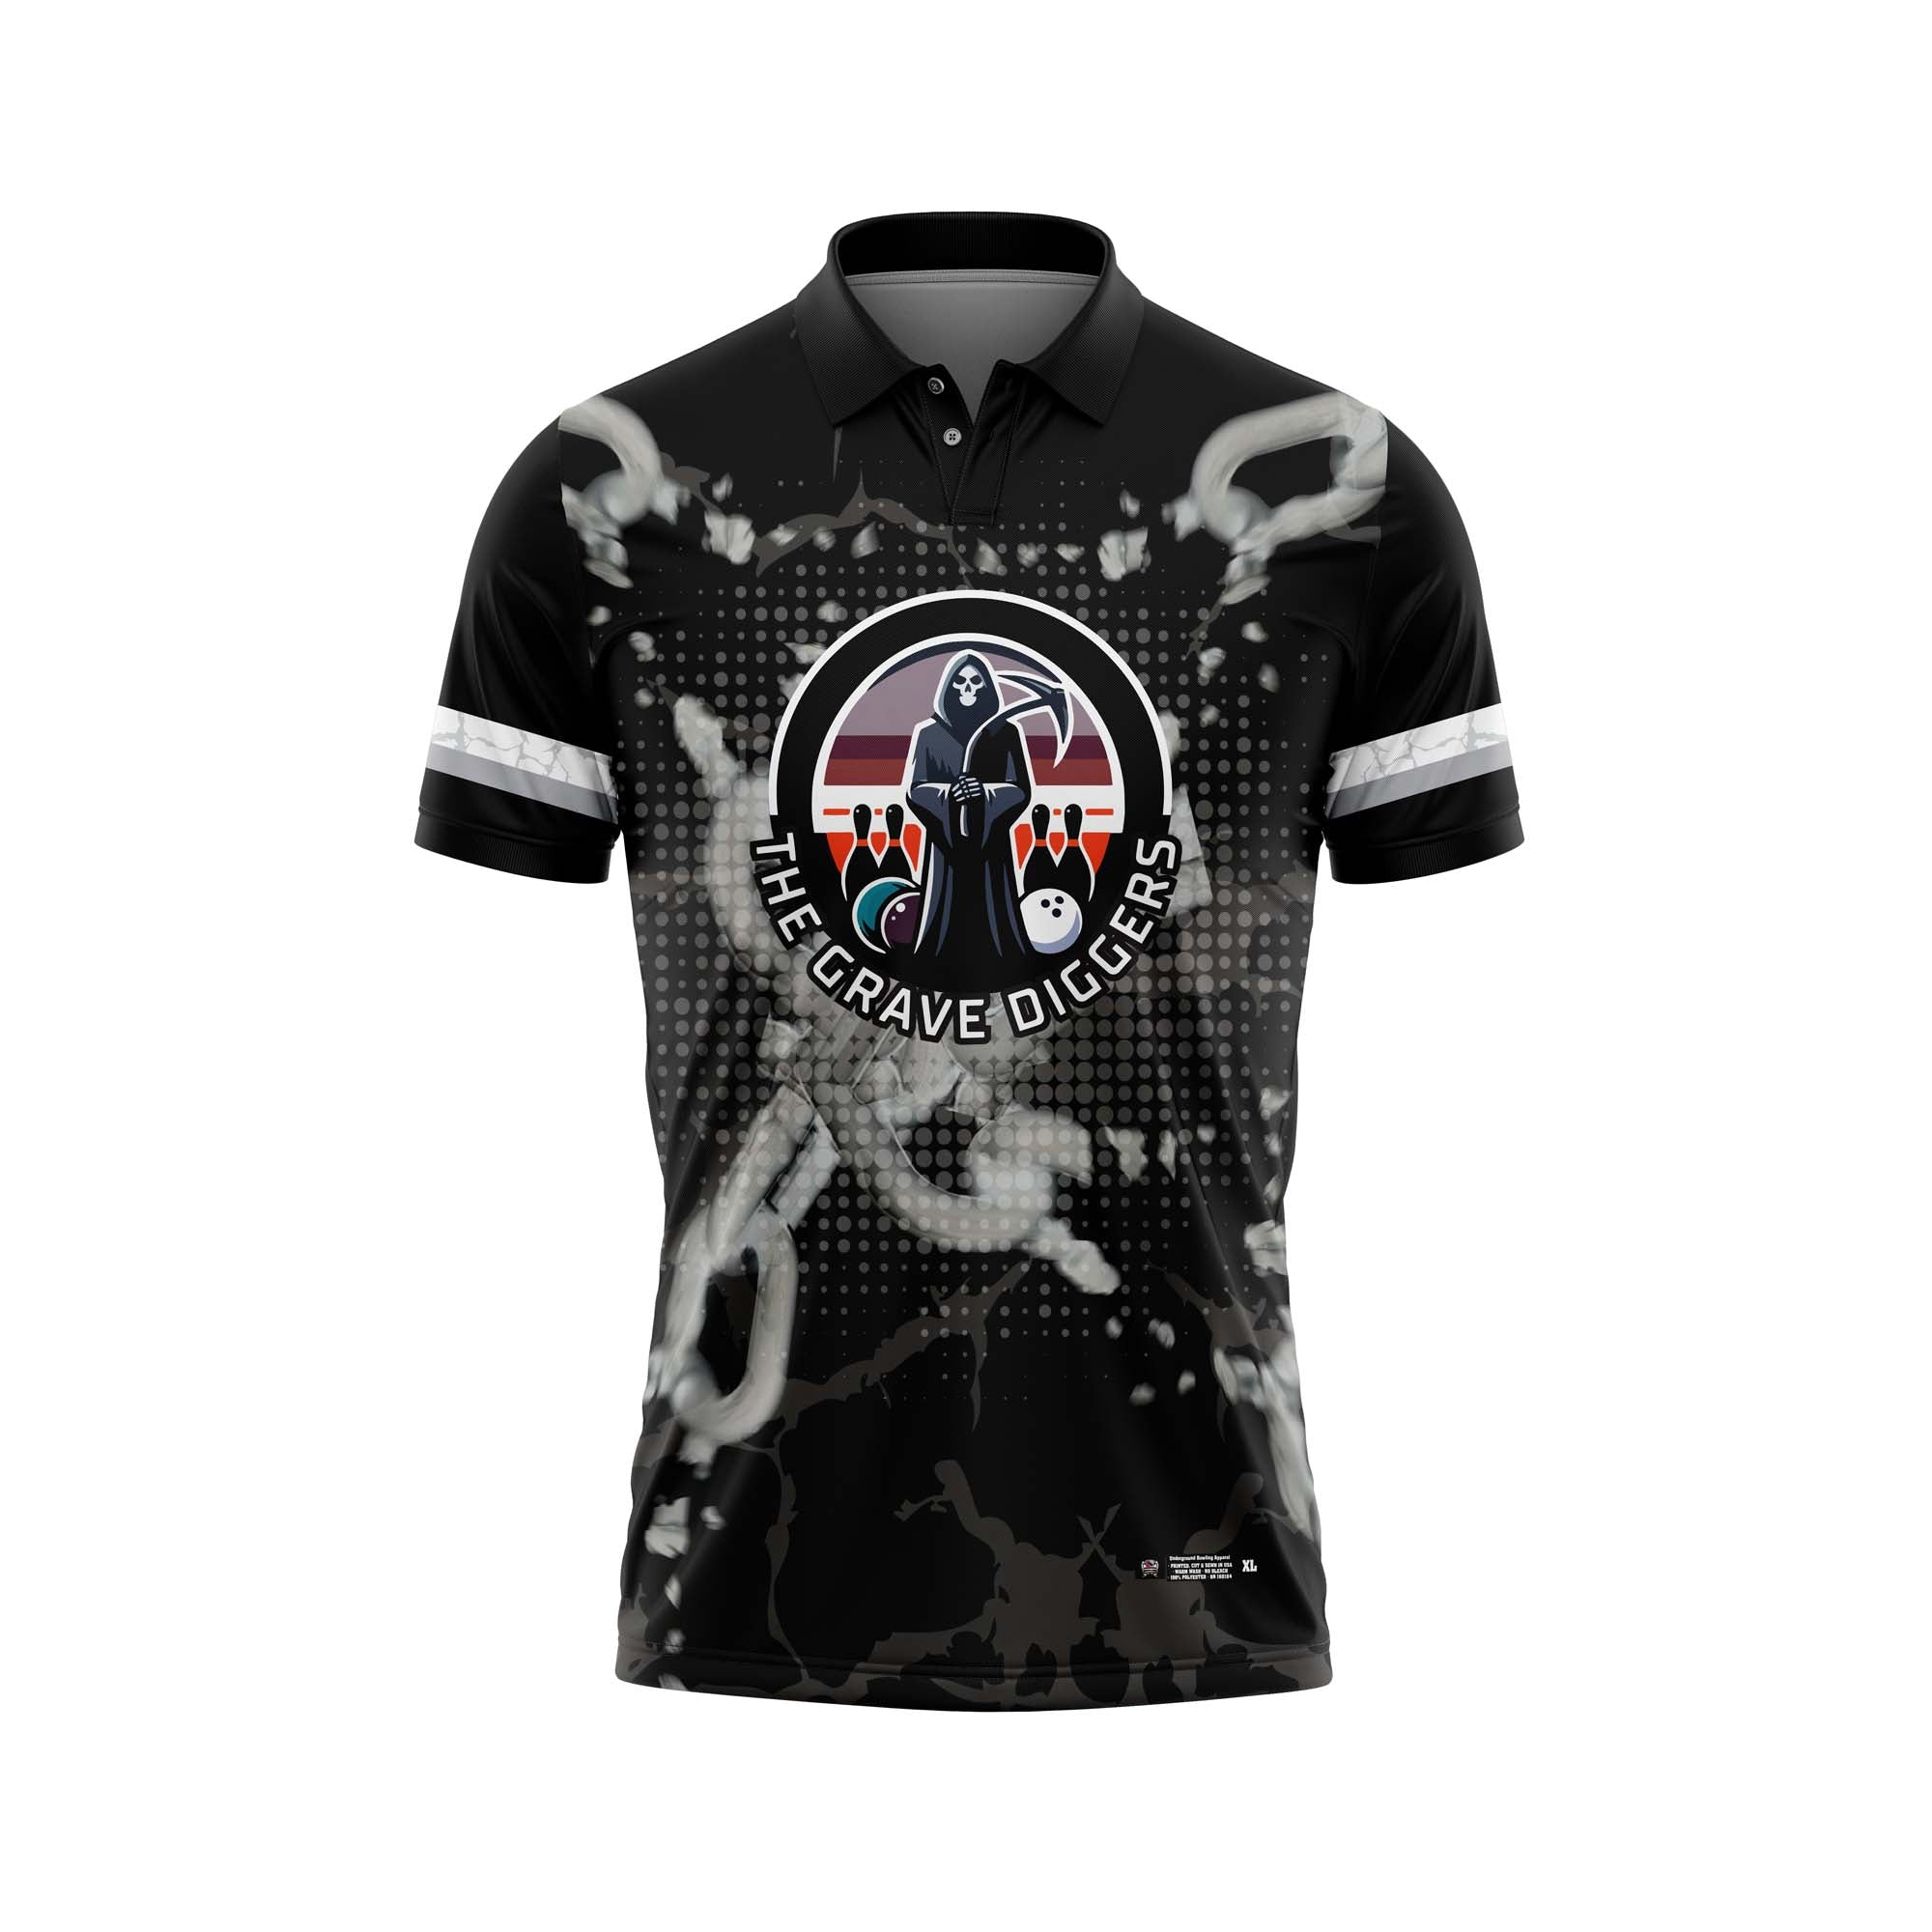 The Grave Diggers Chains Jersey